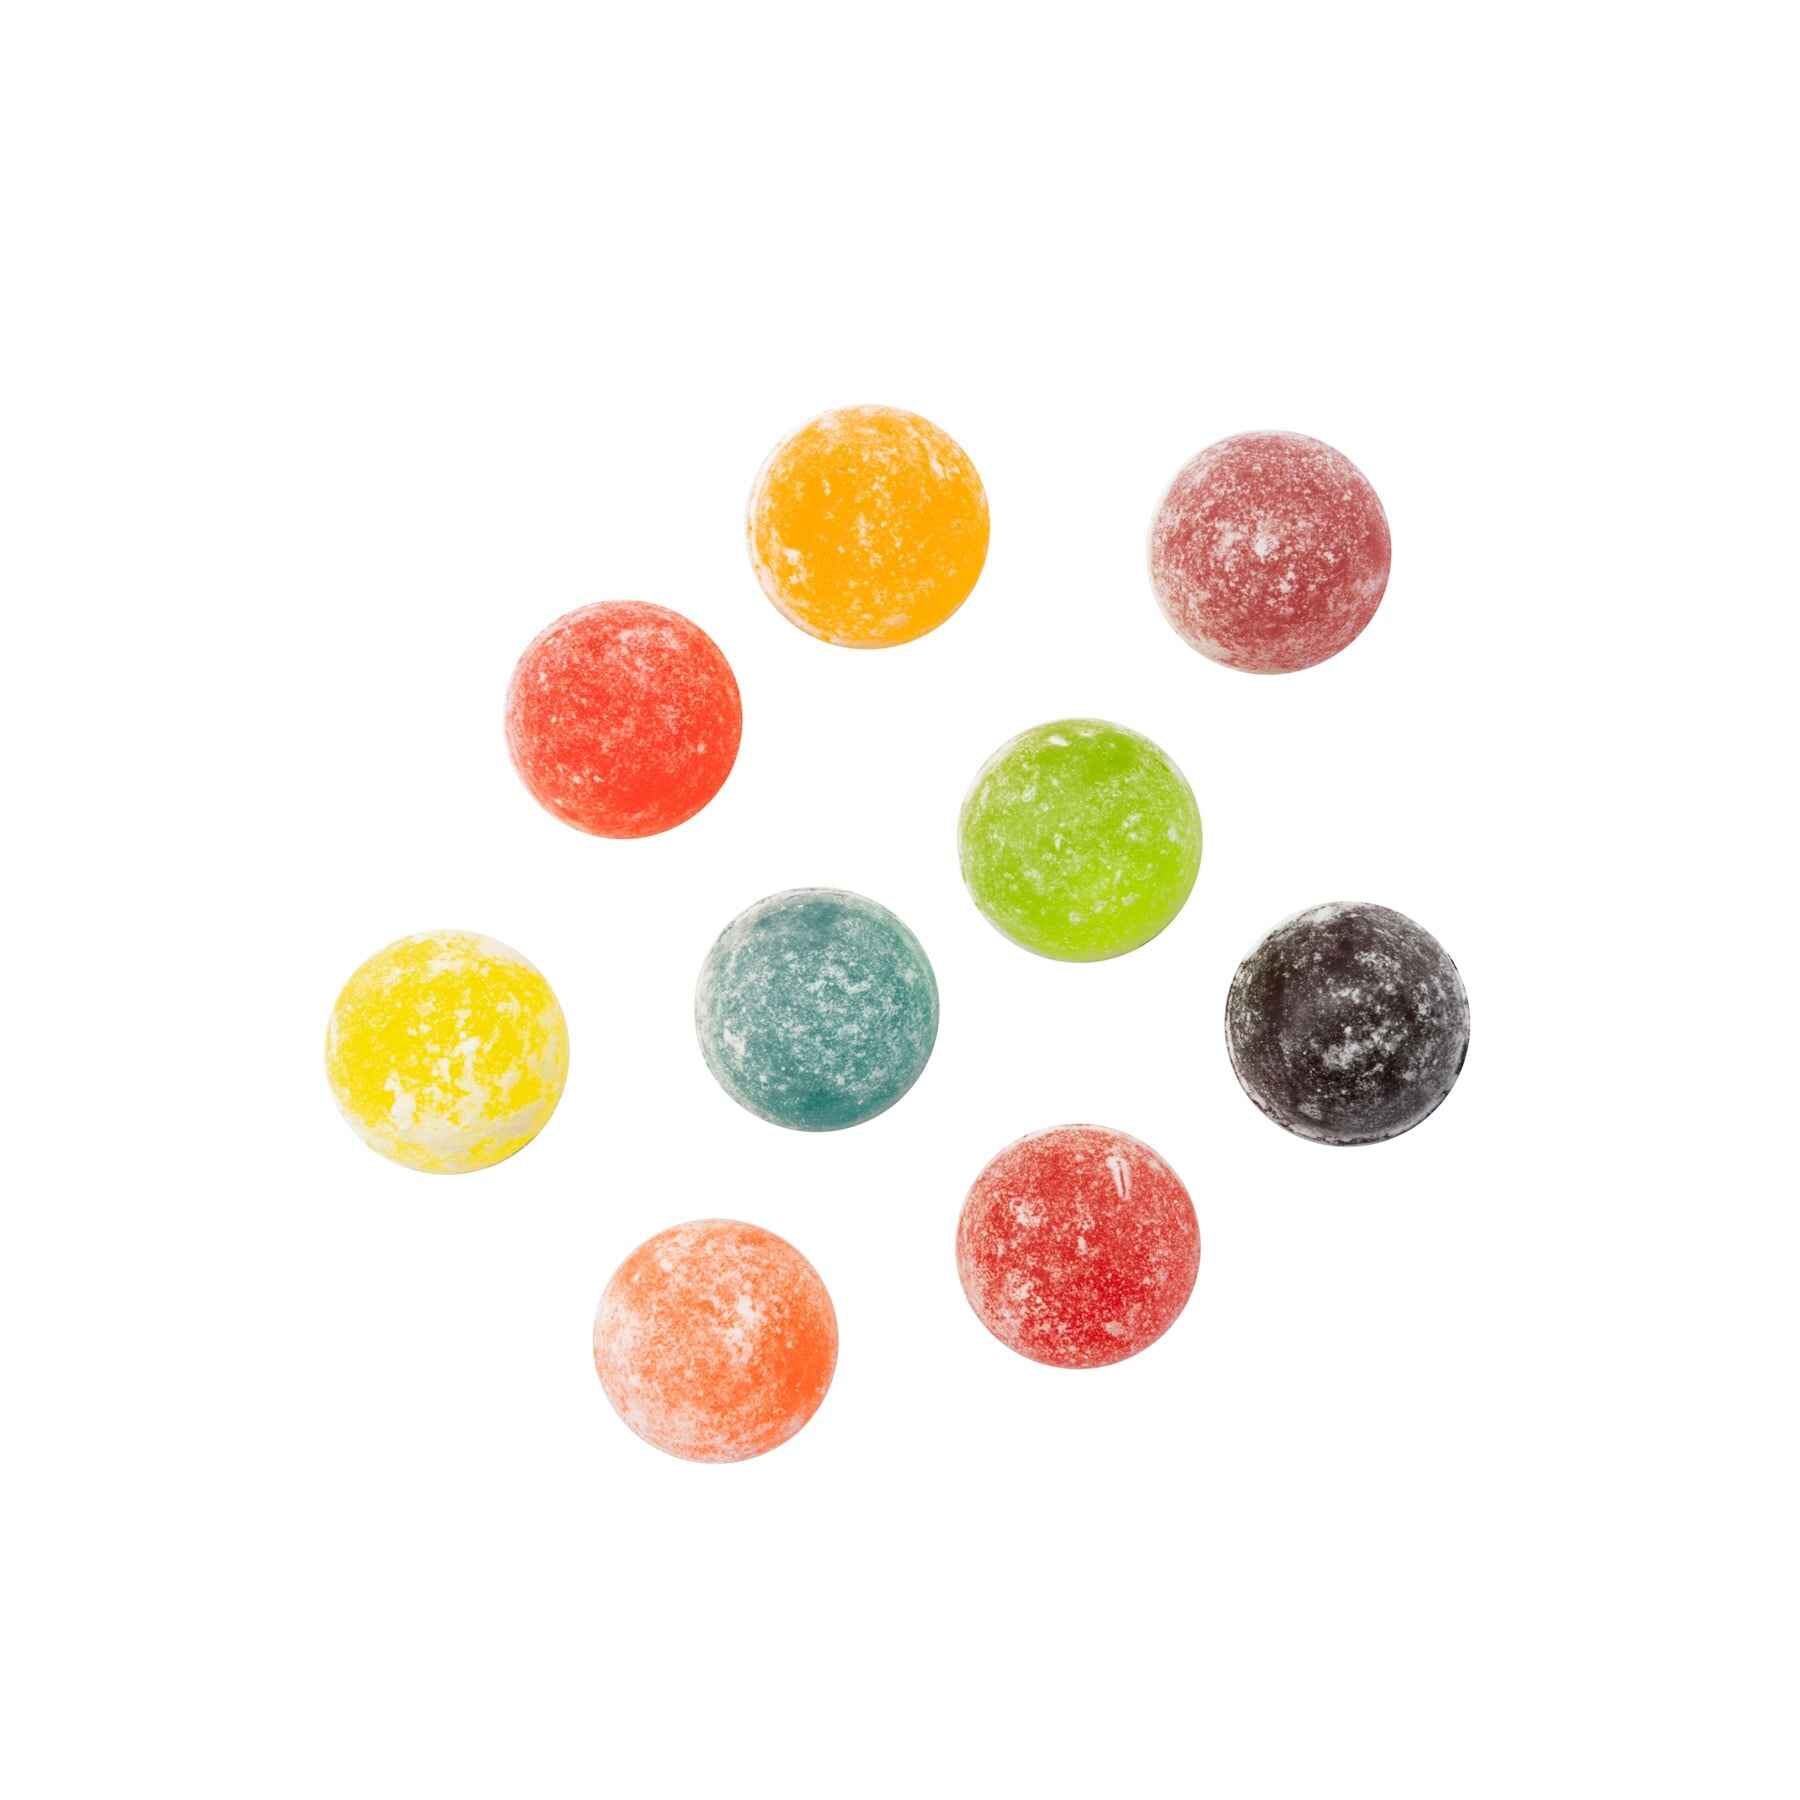 Astro Hard Candy Planets 180mg